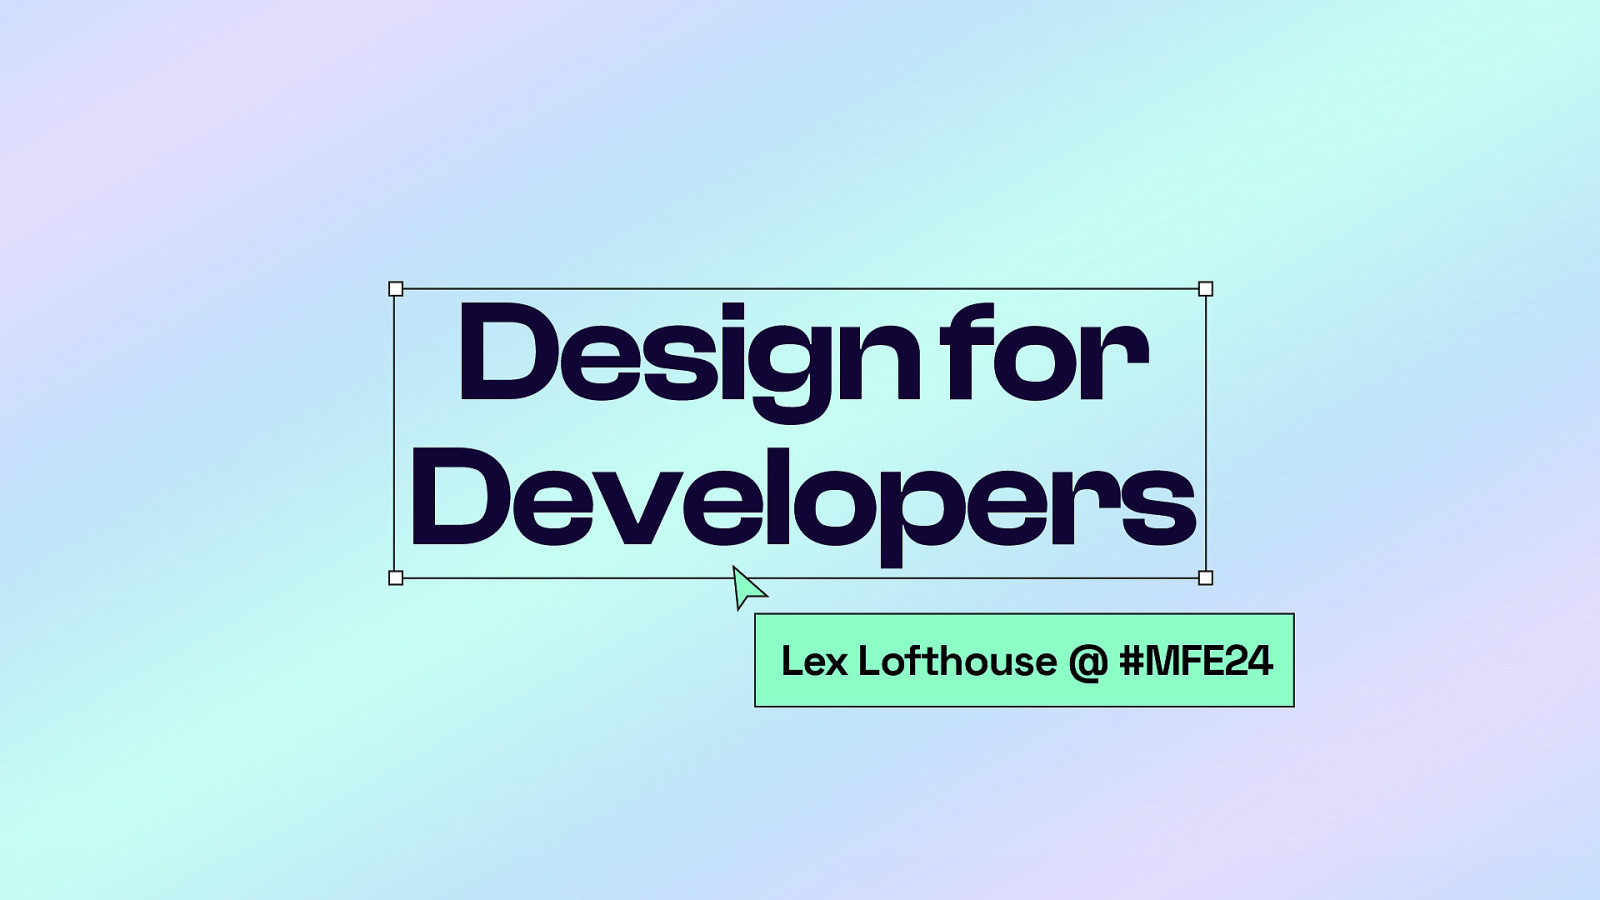 Design for Developers by Lex Lofthouse